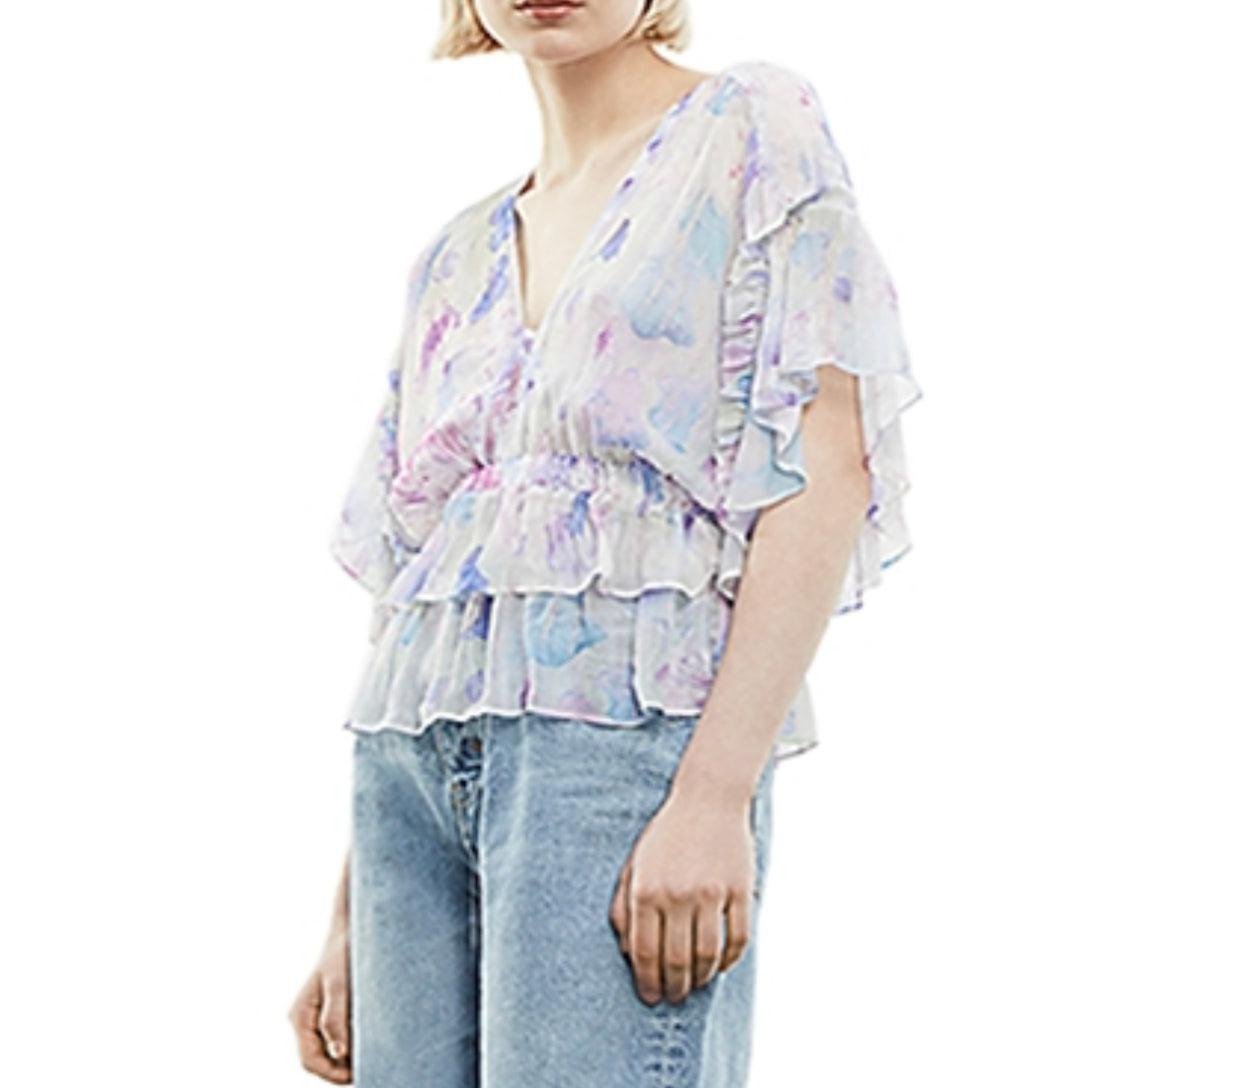 Load image into Gallery viewer, The Kooples Lilac Chiffon Top
